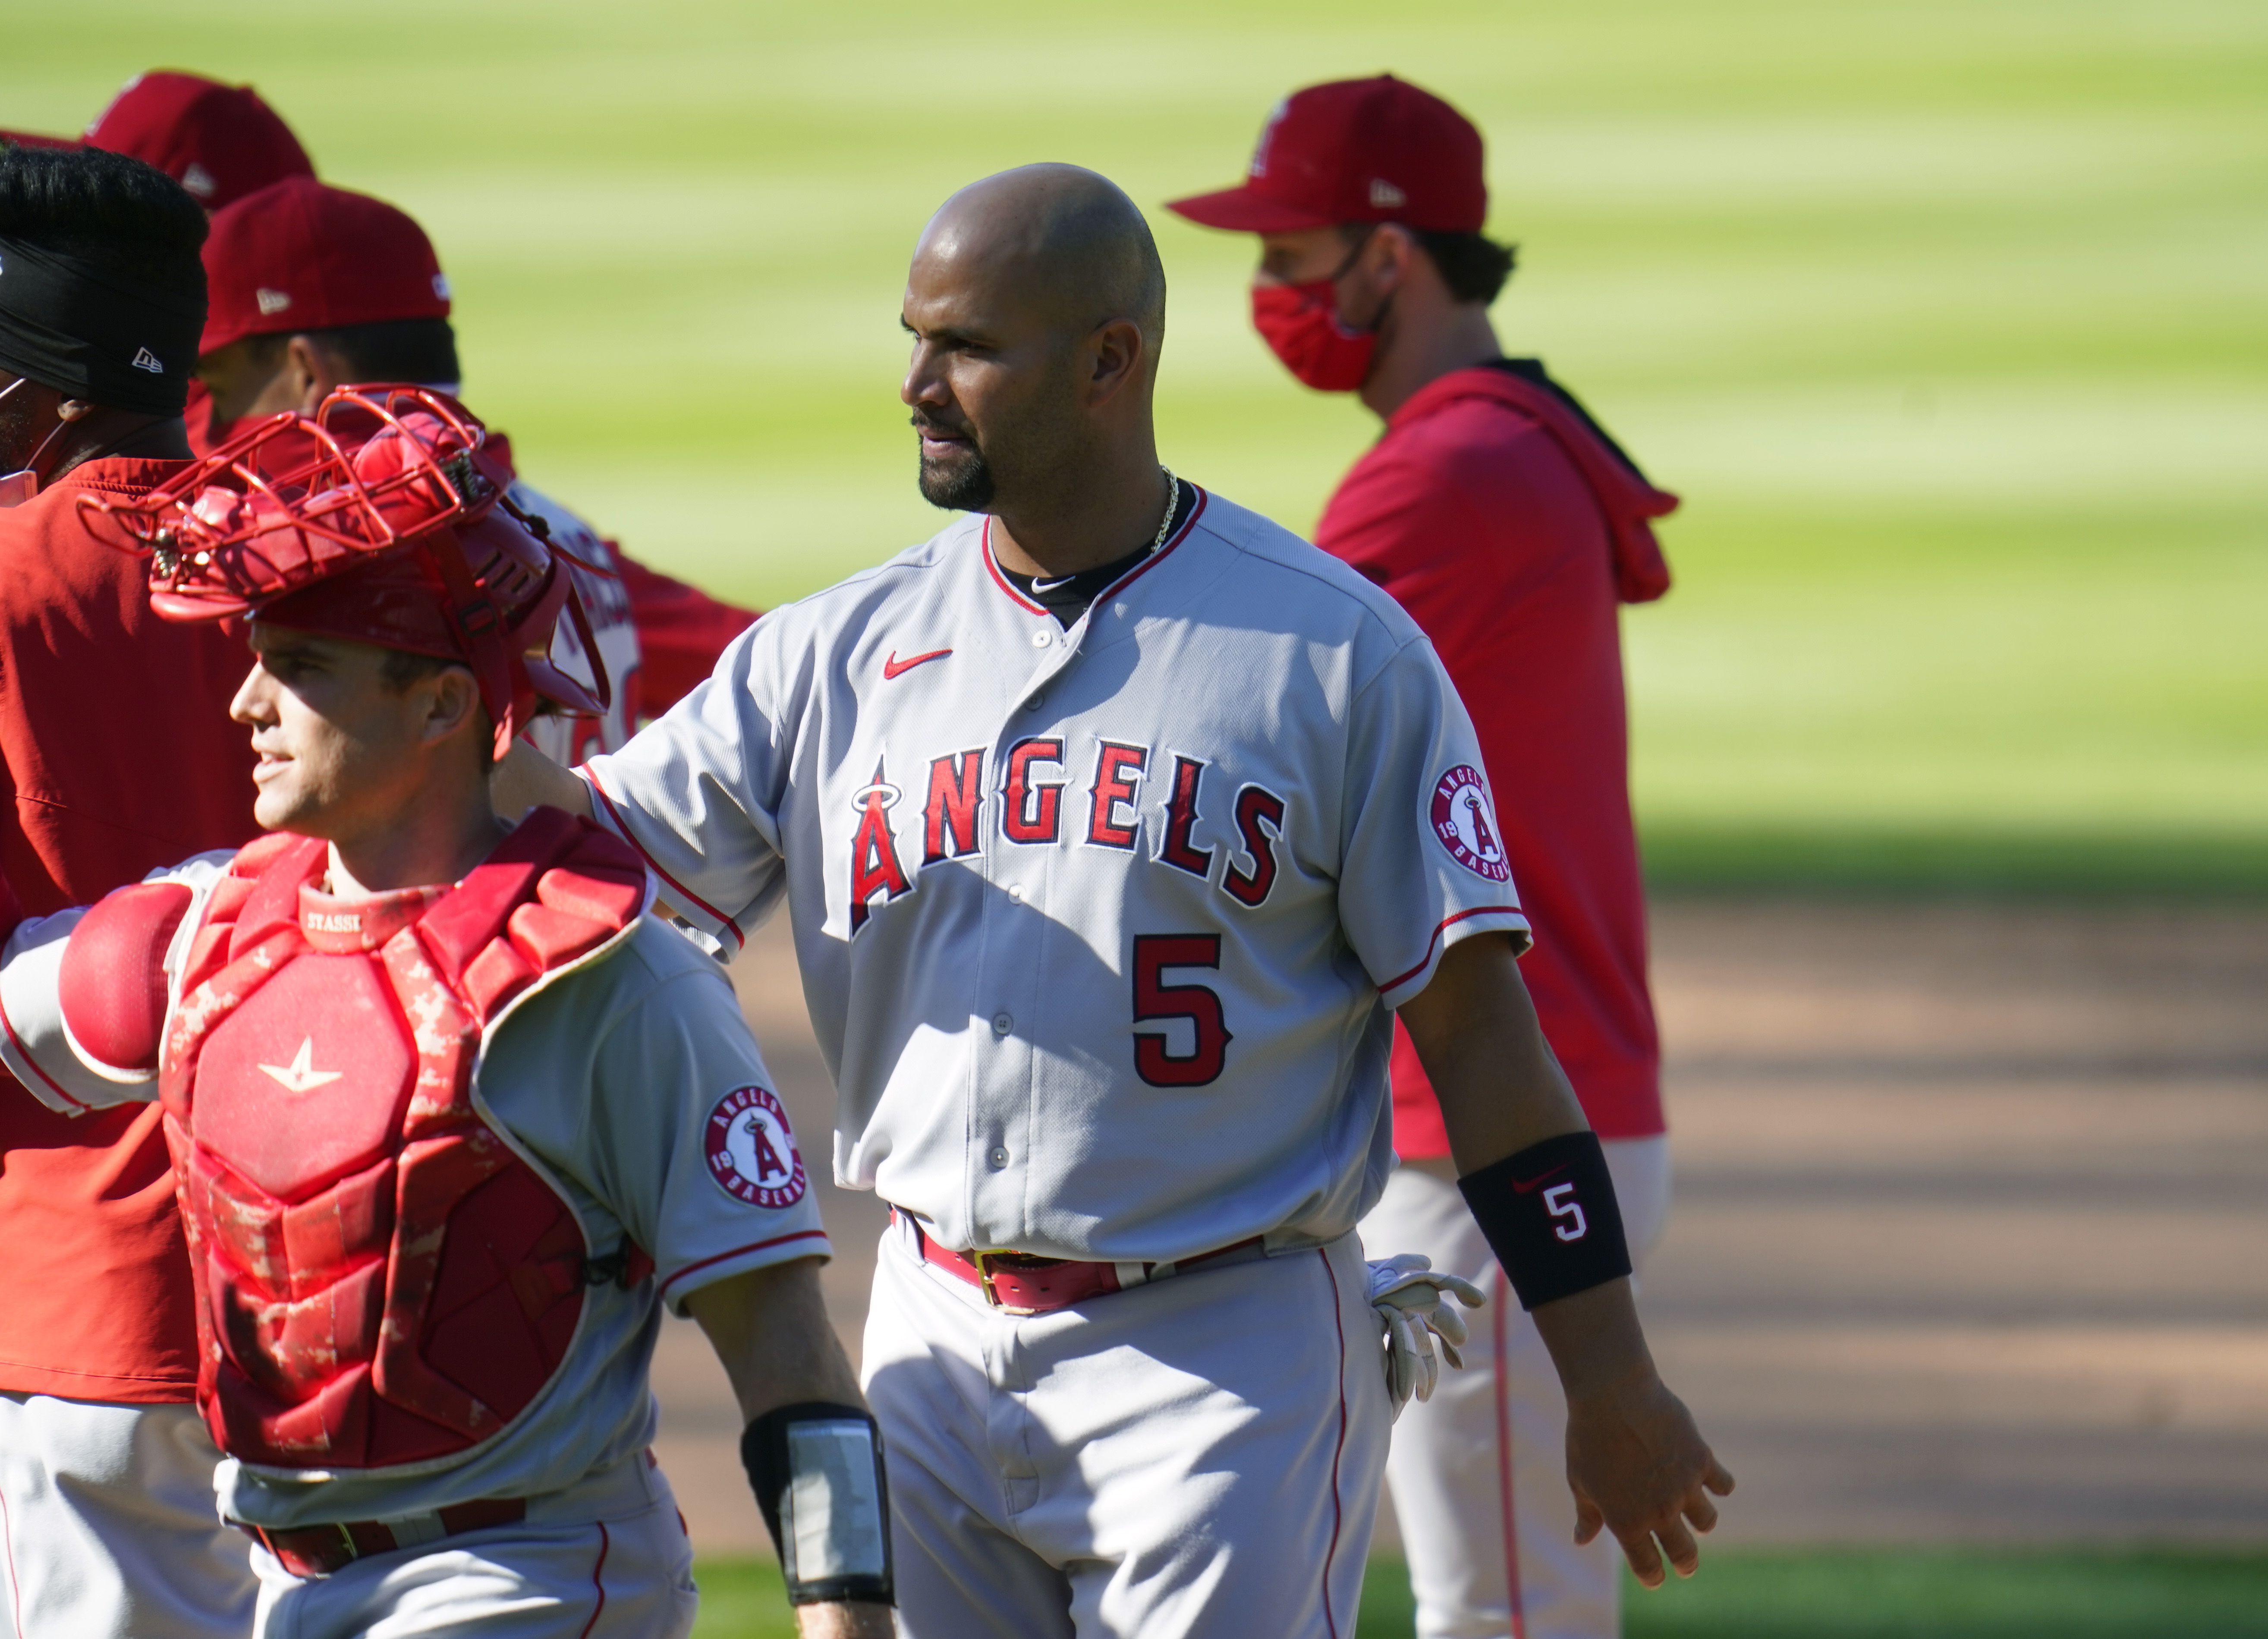 Catching up with Albert Pujols